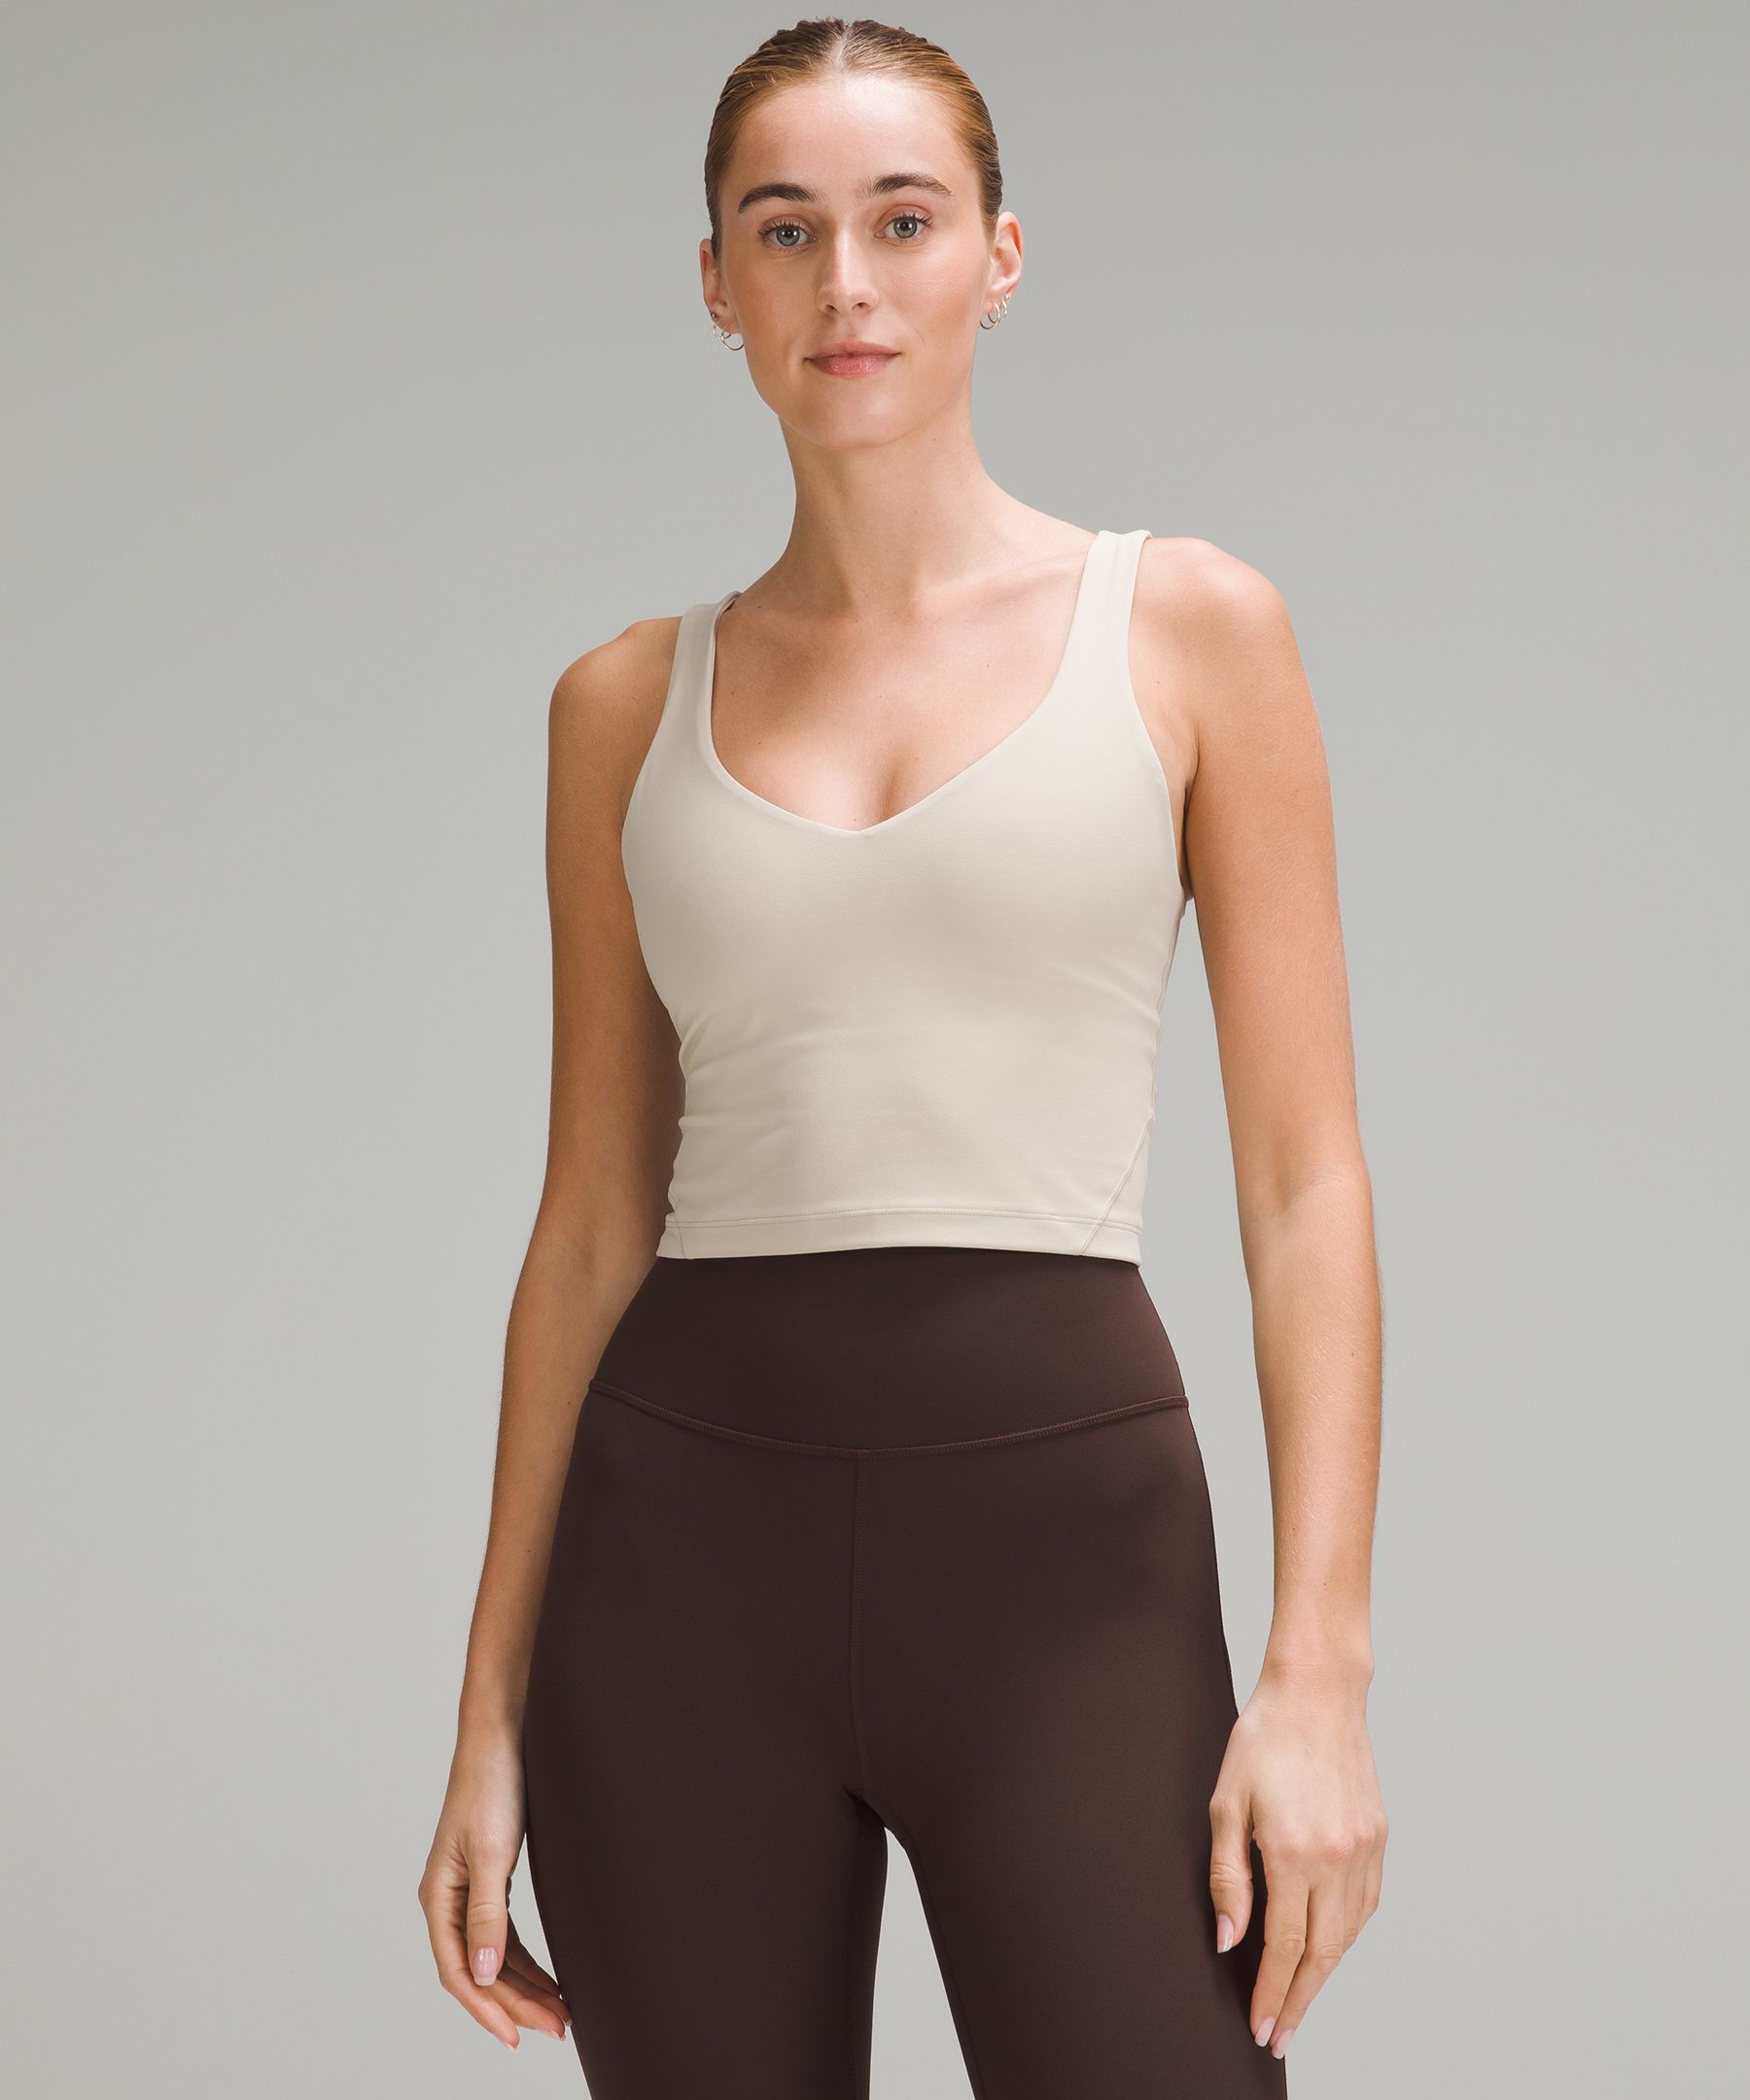 Thrifts In The 321, lululemon align tank drop⚡️ tan/coffee color align tank!  removable pads and brand new with tags! sizes: two 2, one 6. comment the